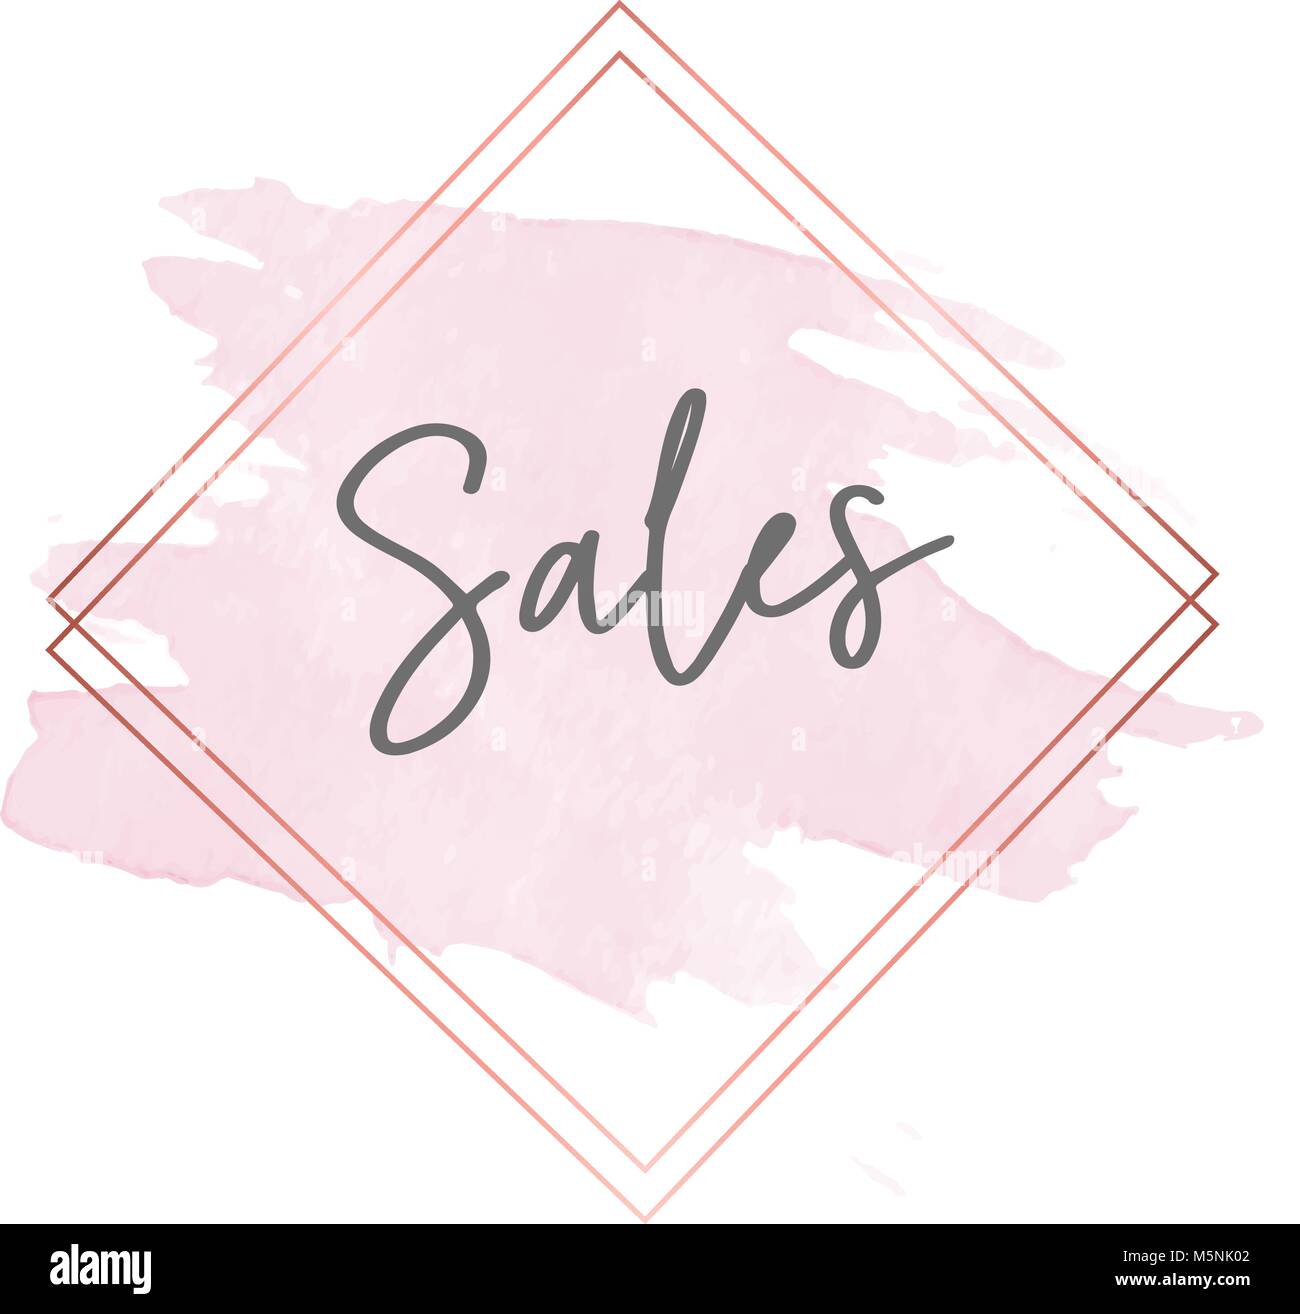 Sales gold frame and pink brush stroke, sales shop message, poster for sales, watercolor pink brush stroke. Hand drawn lettering design. Stock Vector